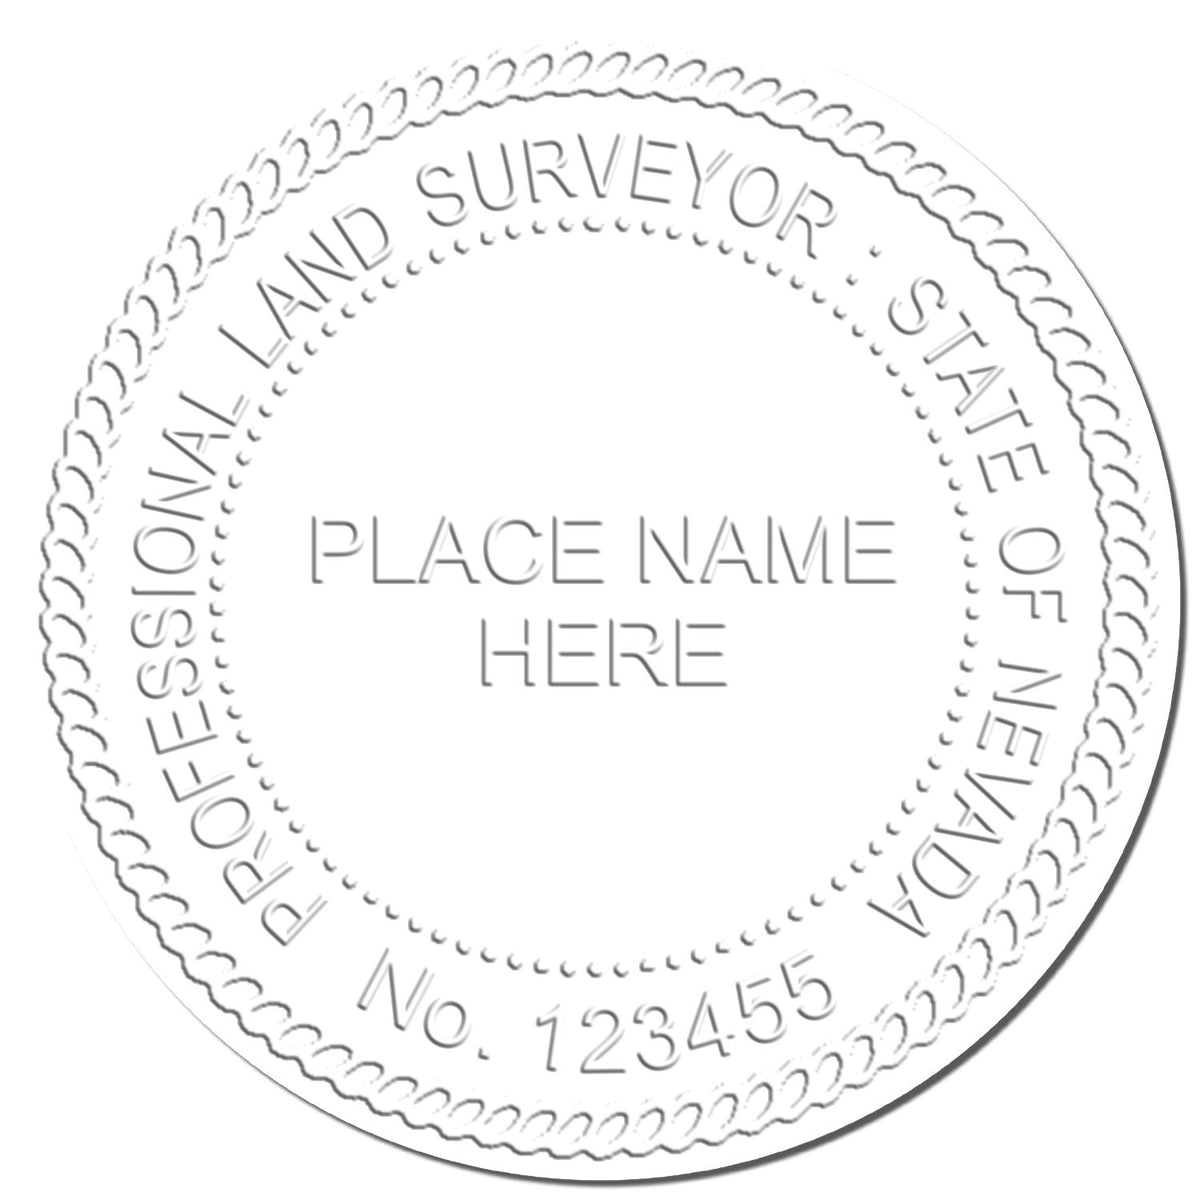 This paper is stamped with a sample imprint of the Hybrid Nevada Land Surveyor Seal, signifying its quality and reliability.